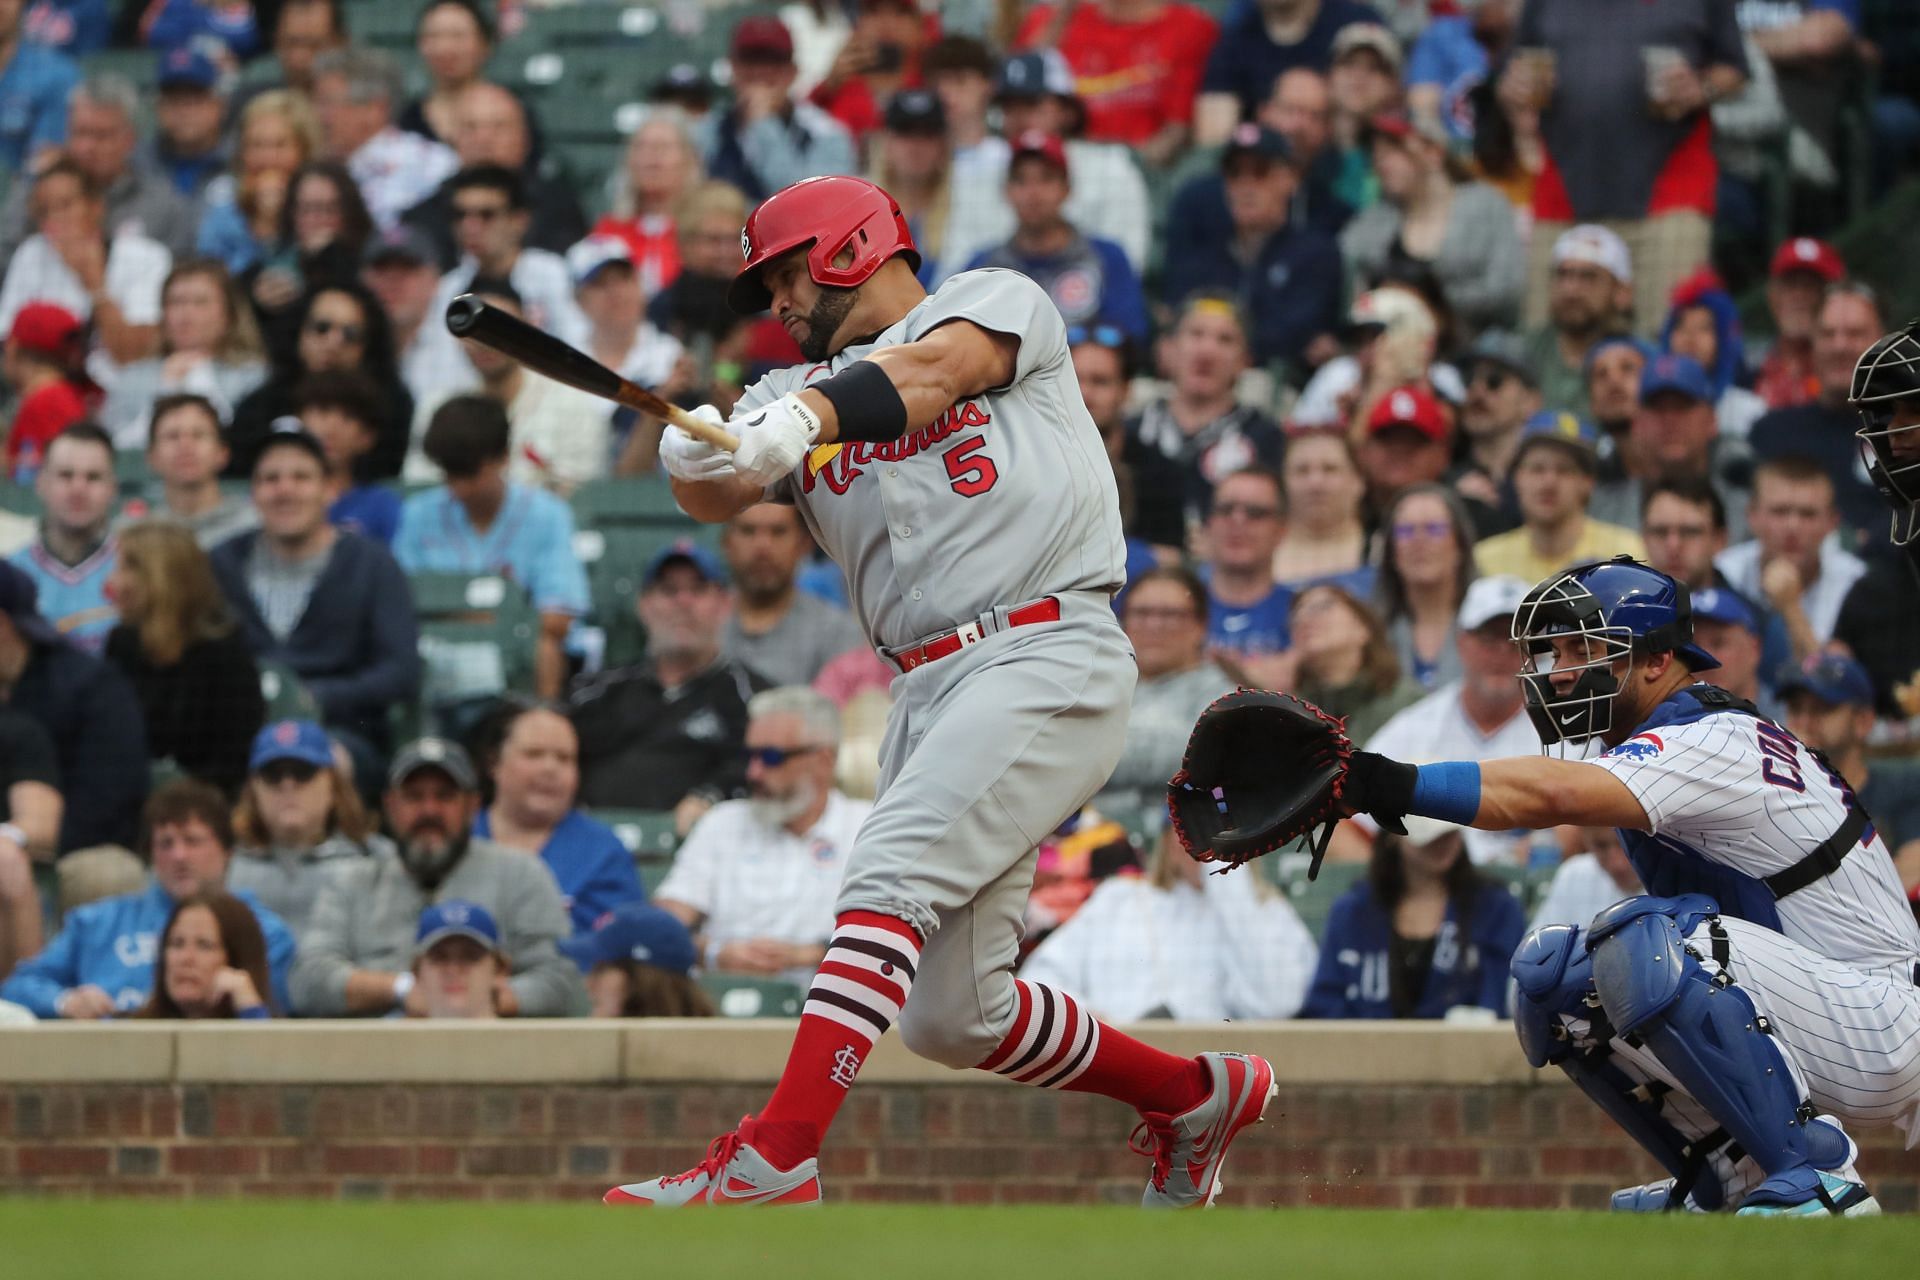 Albert Pujols of the St. Louis Cardinals hits a single Wrigley Field